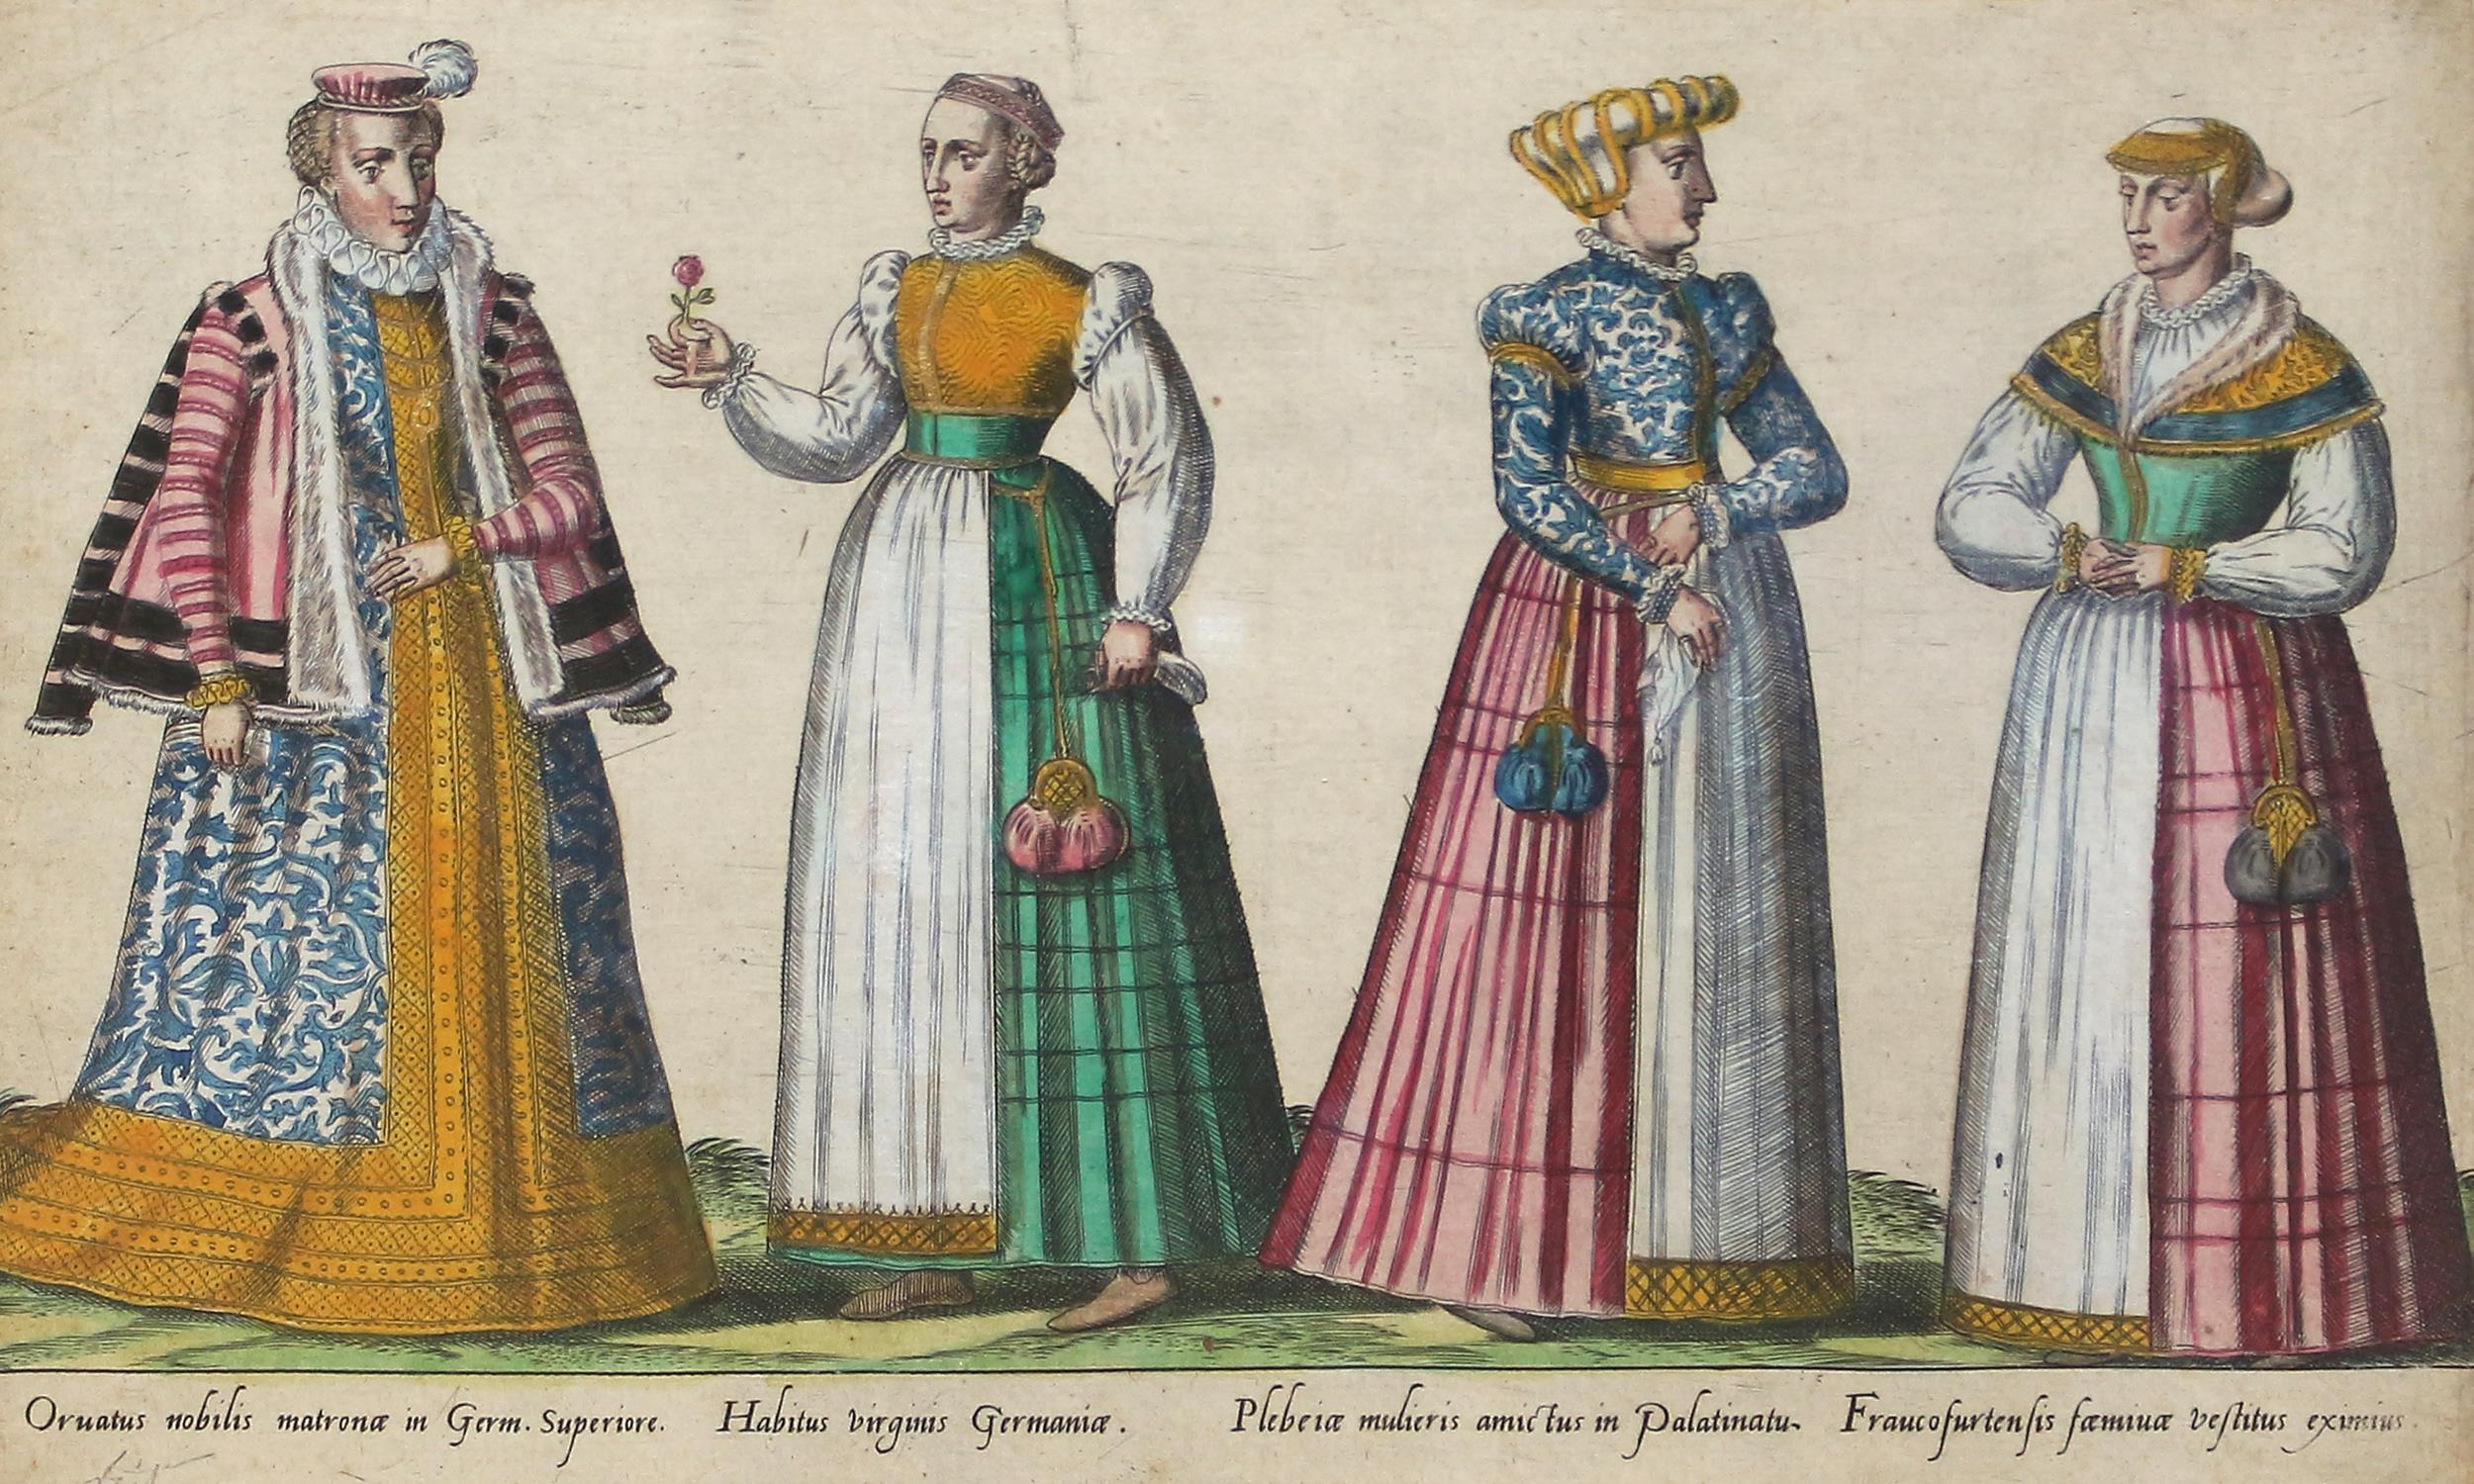 Decorative original set of coloured copper engravings depicting German fashion in the 16th century, around 1580. 

Approx. 20 x 29 and 21.5 x 32 cm. based on matting and glass in frame (not unframed). German fashion around 1580.

Originates from